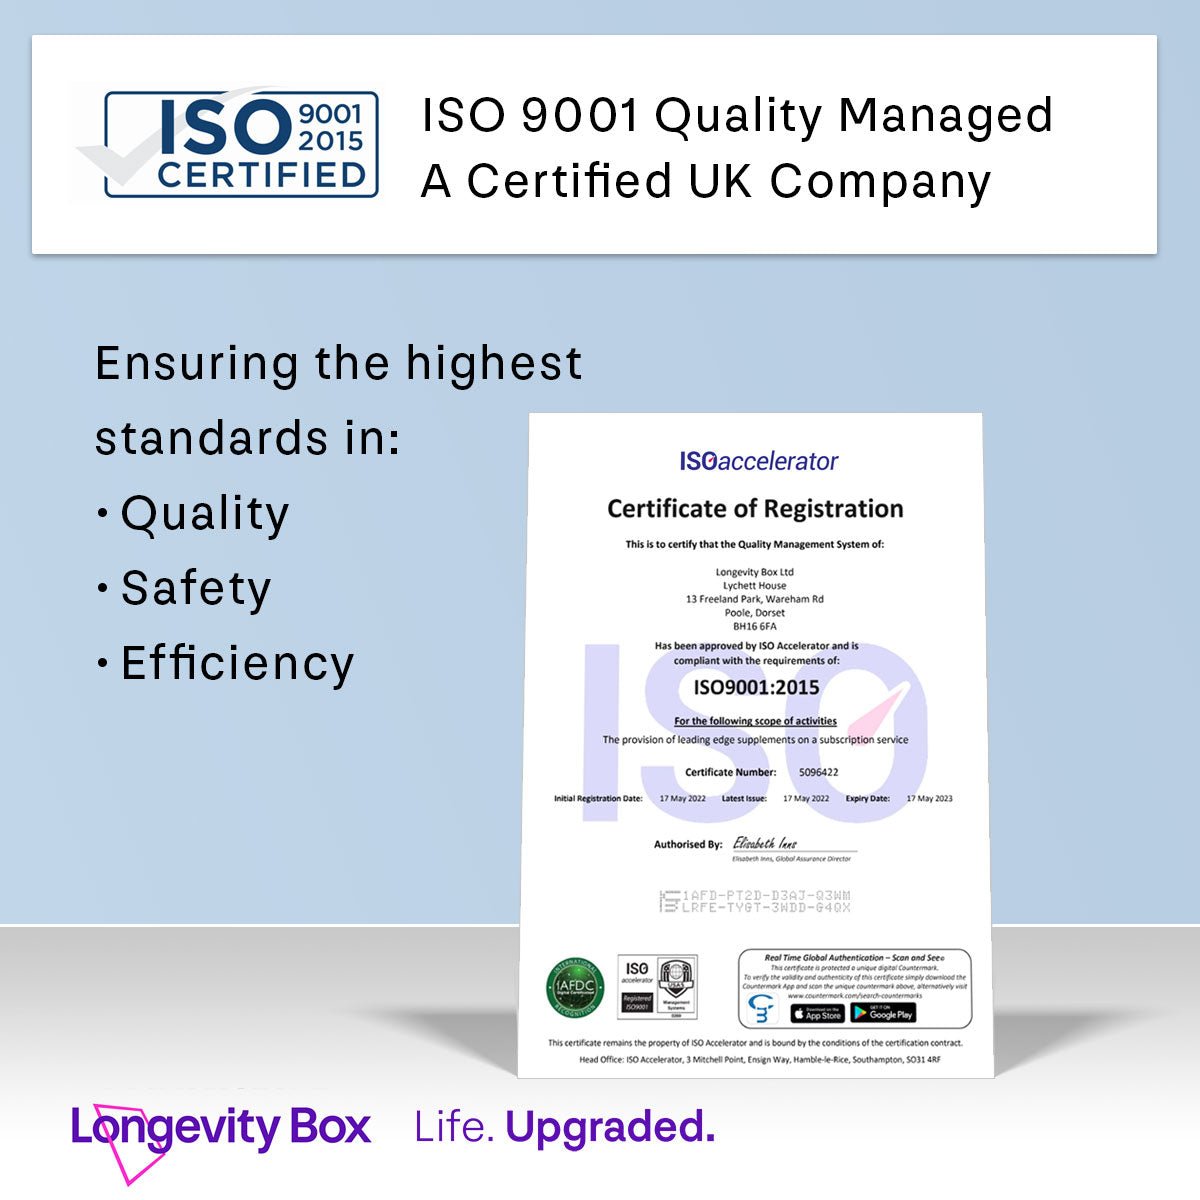 ISO 9001 Quaility Managed a Certified UK Company